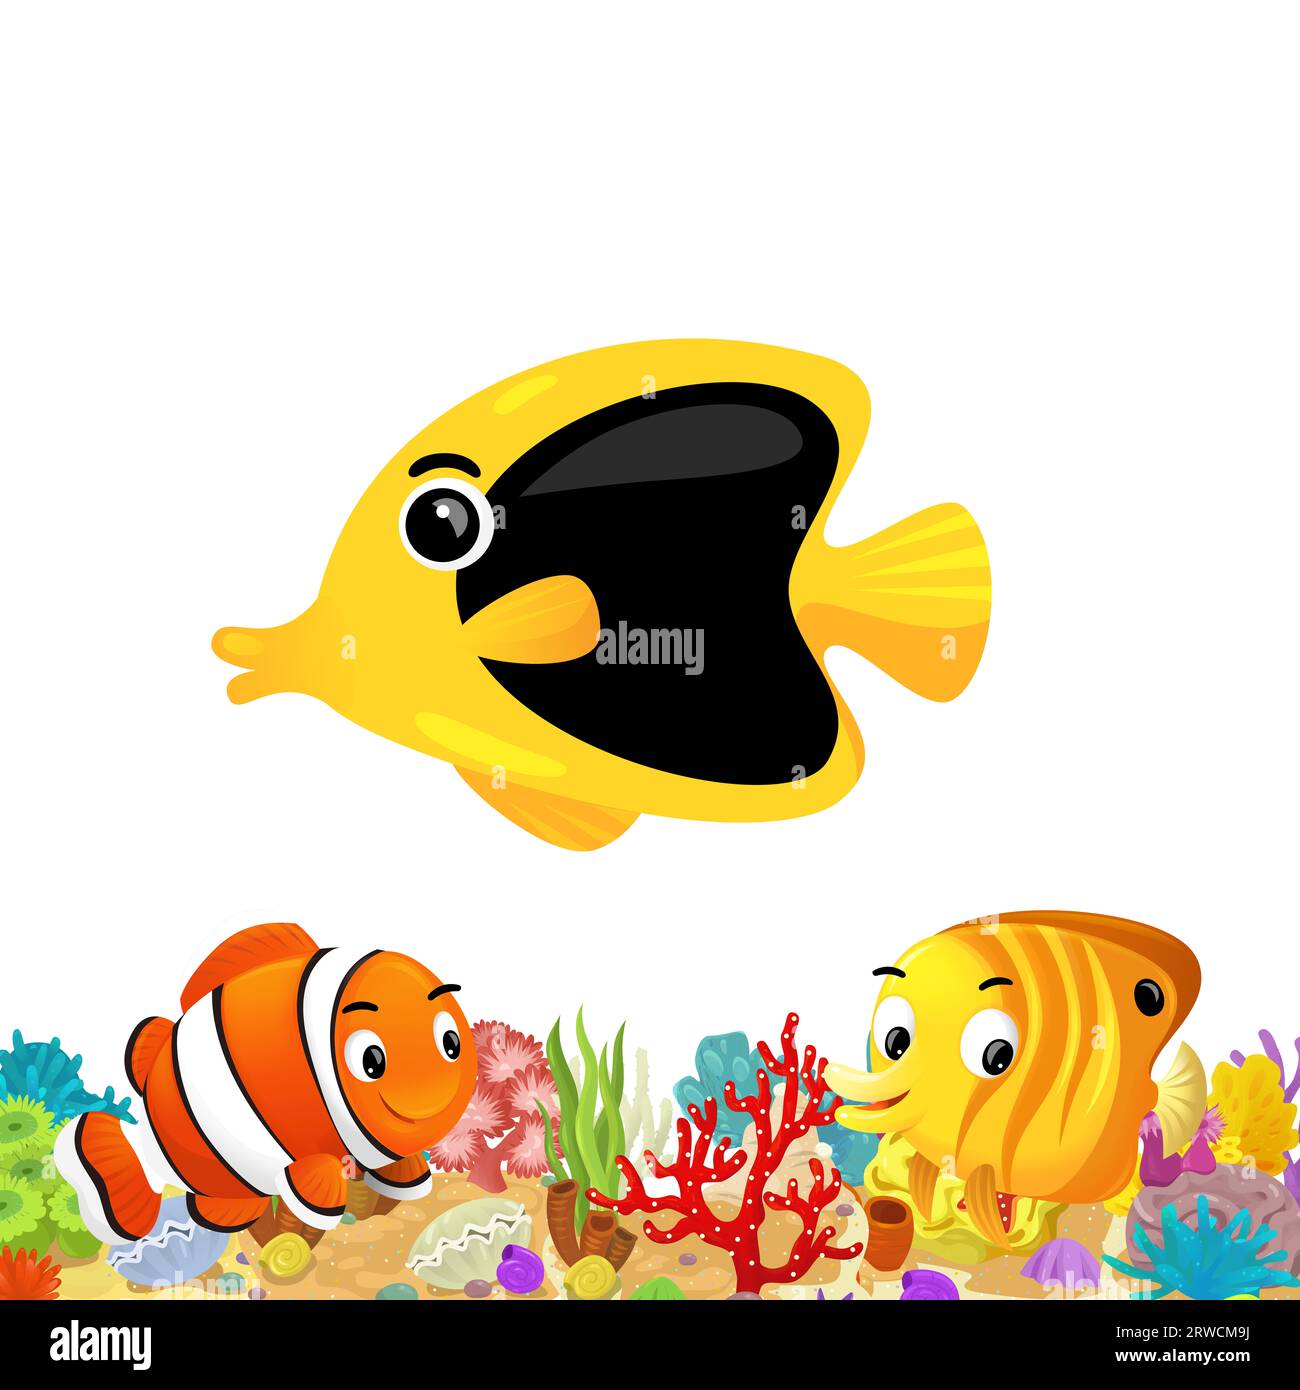 cartoon scene with coral reef and happy fishes swimming near isolated illustration for kids Stock Photo